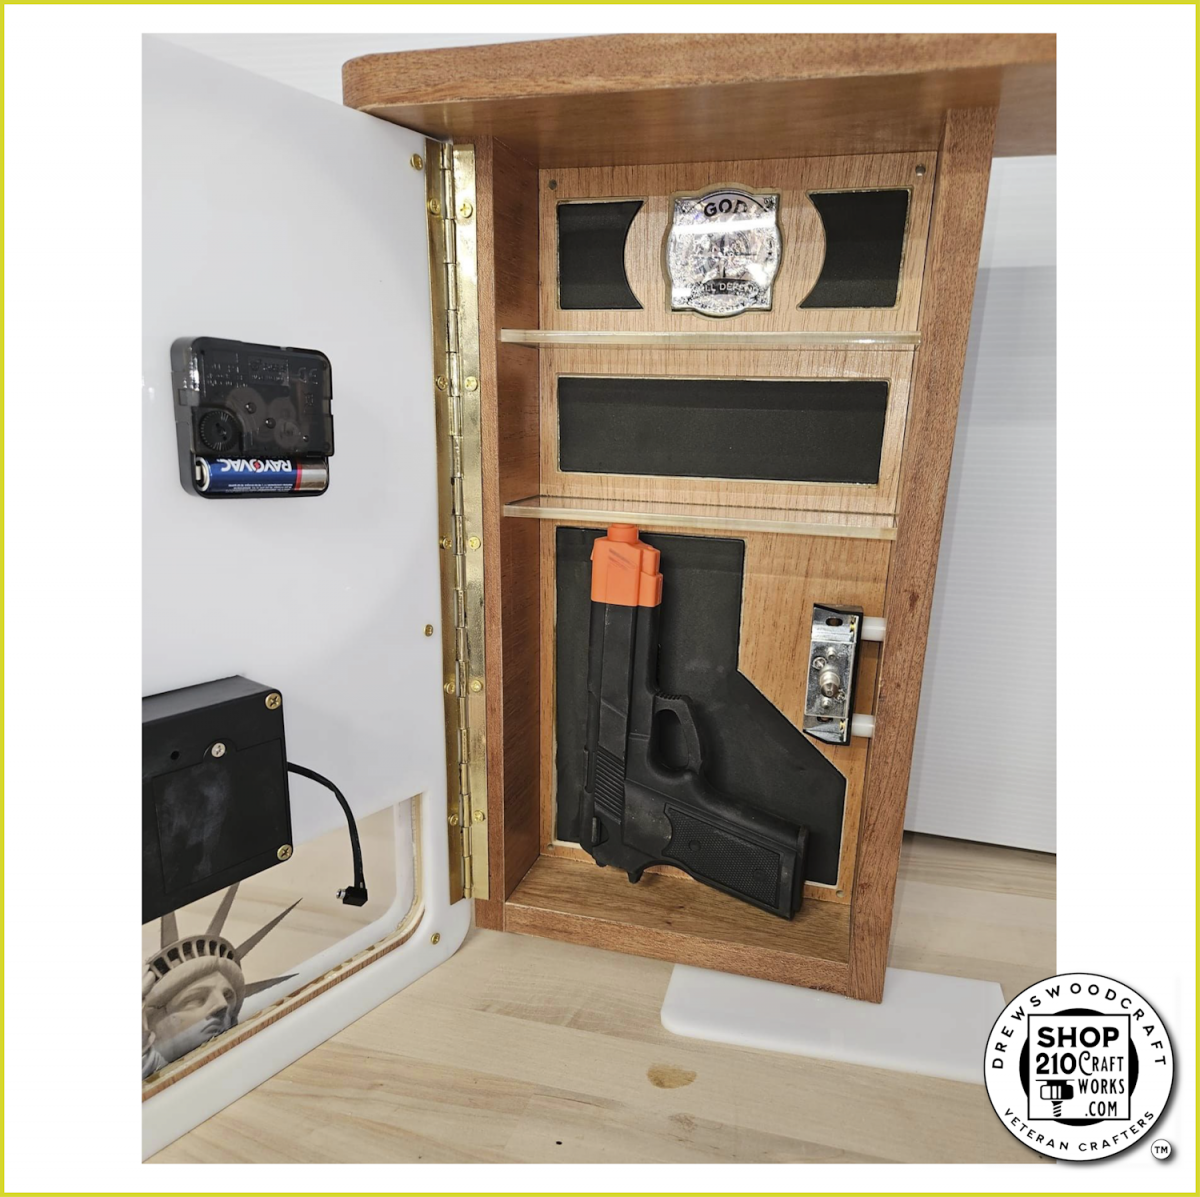 Liberty Model RFID Safe Clock Interior with toy weapon